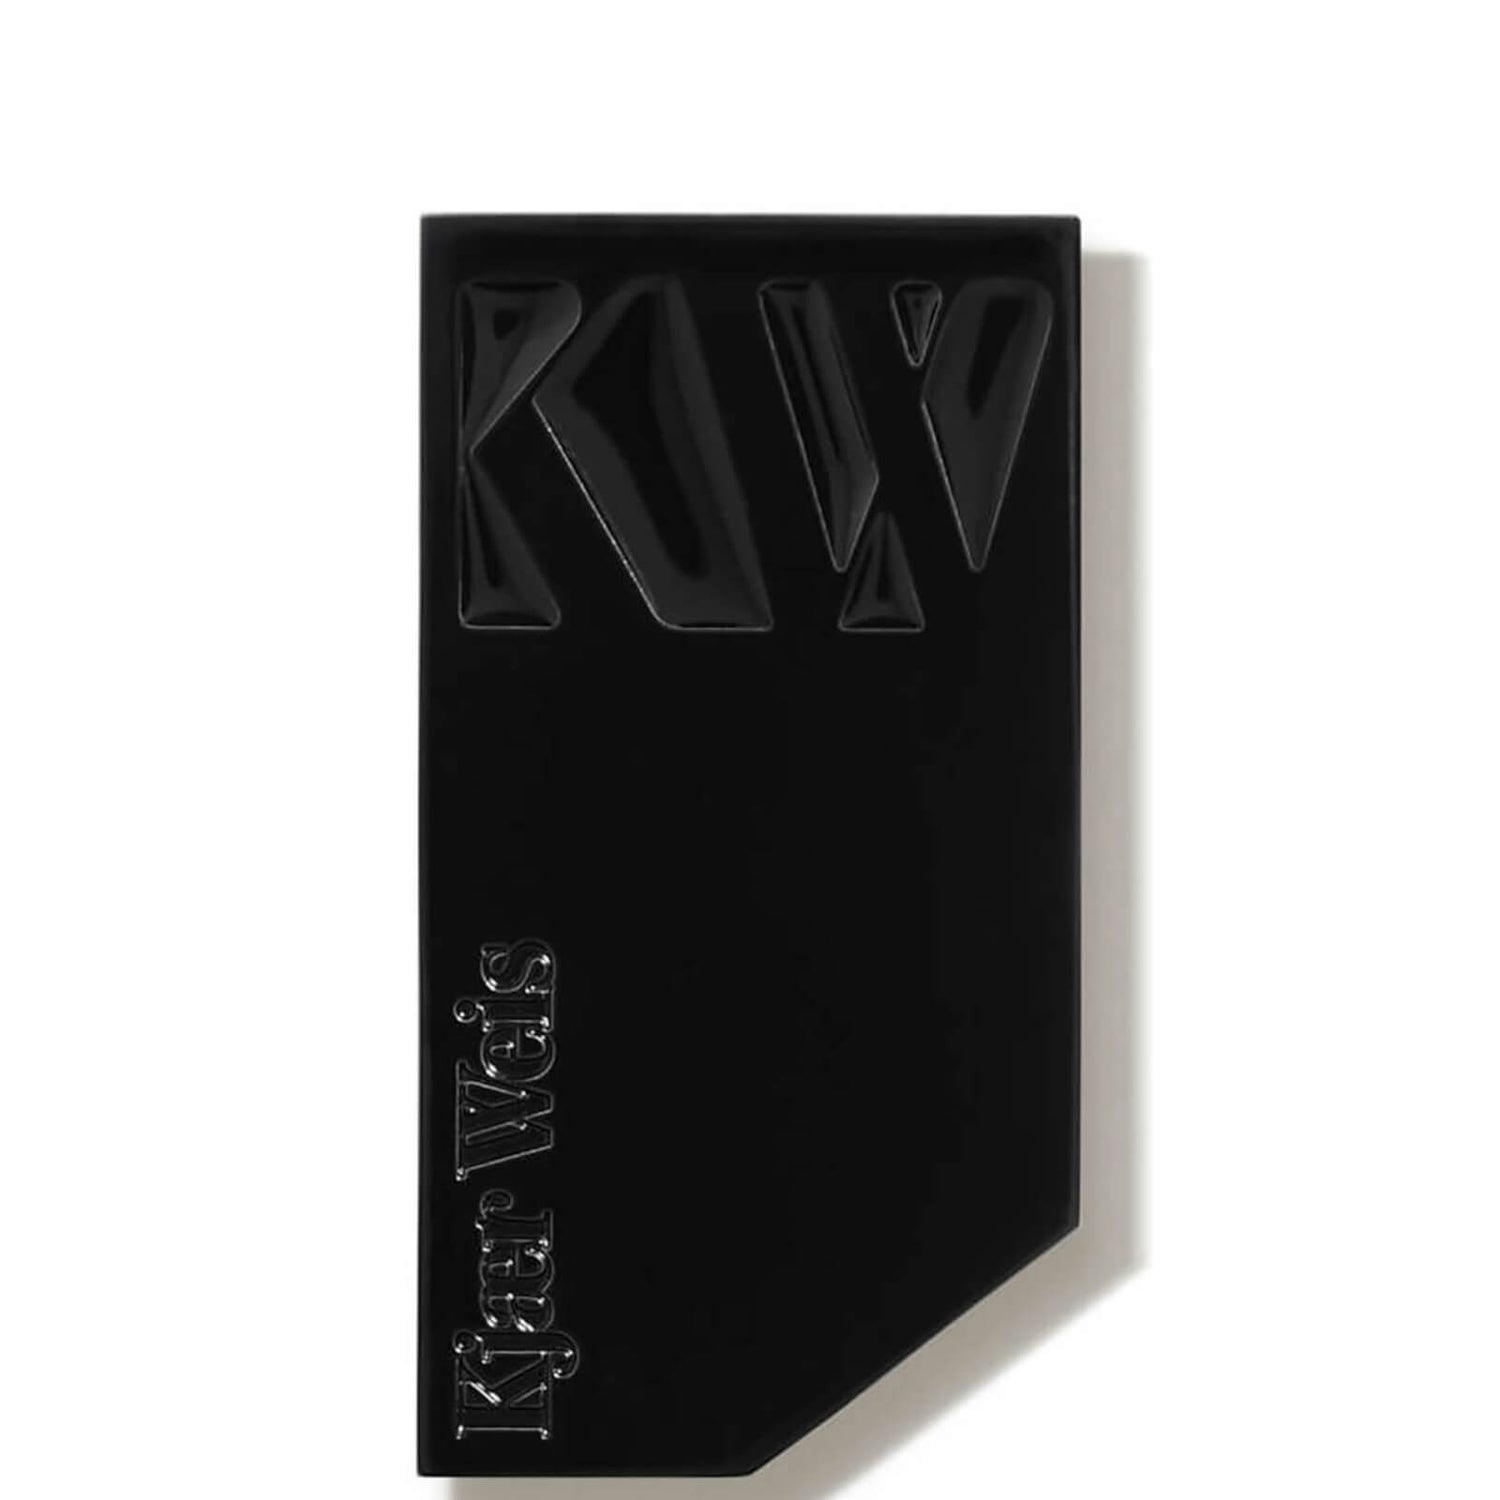 Kjaer Weis Iconic Edition Compact - Lip Balm (1 piece)